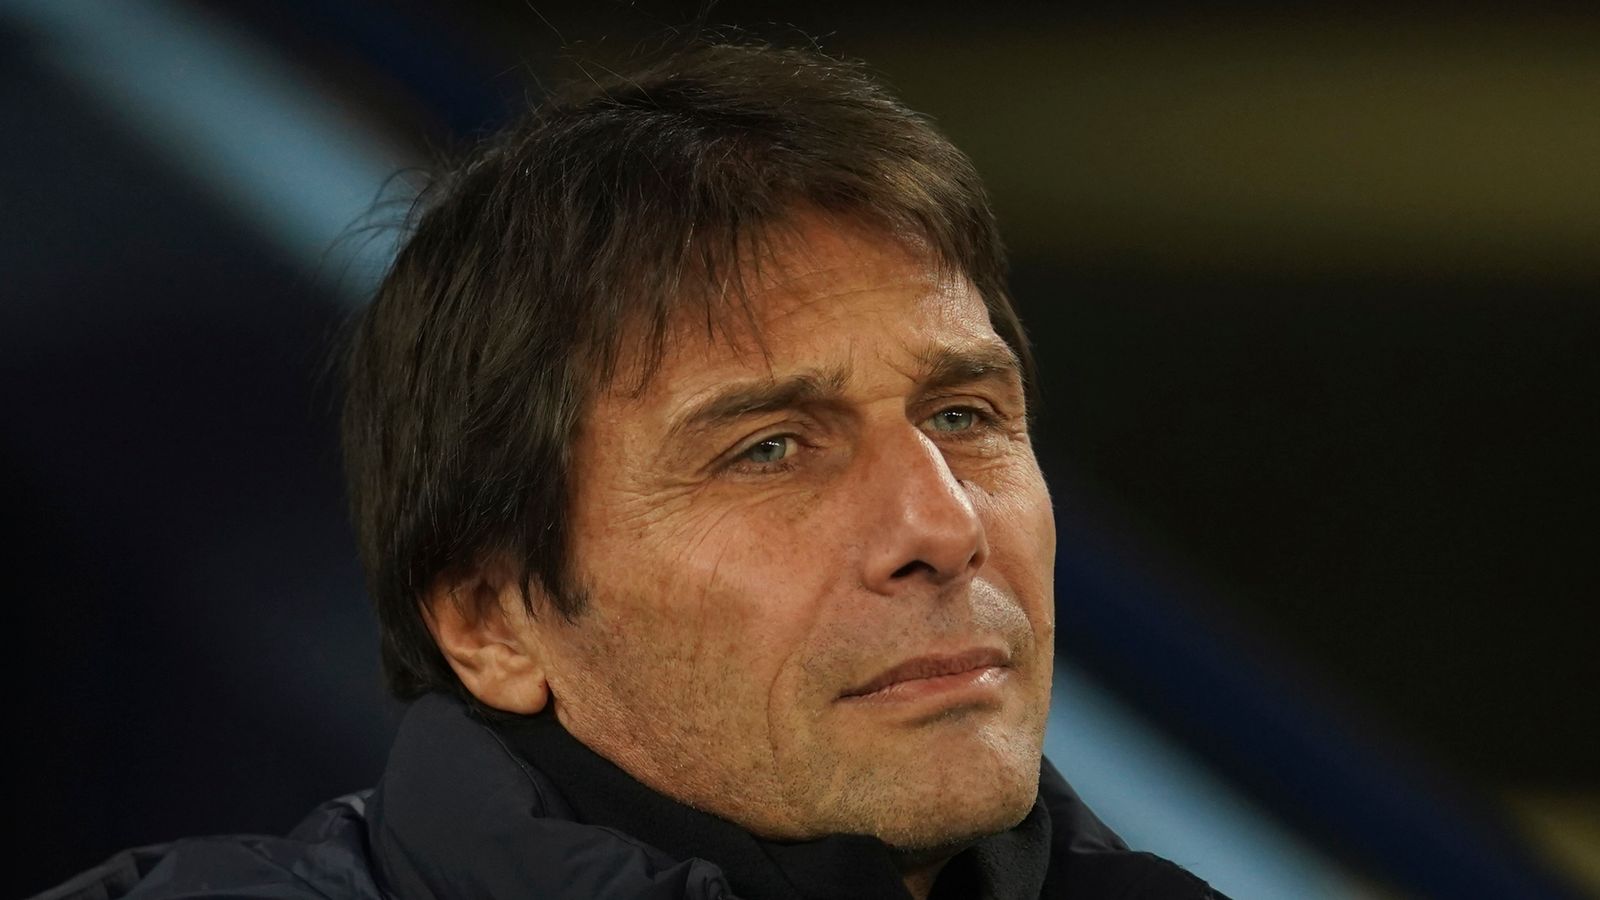 Antonio Conte: Spurs boss puts future on standby but the feeling is he will leave at end of season – Sky in Italy